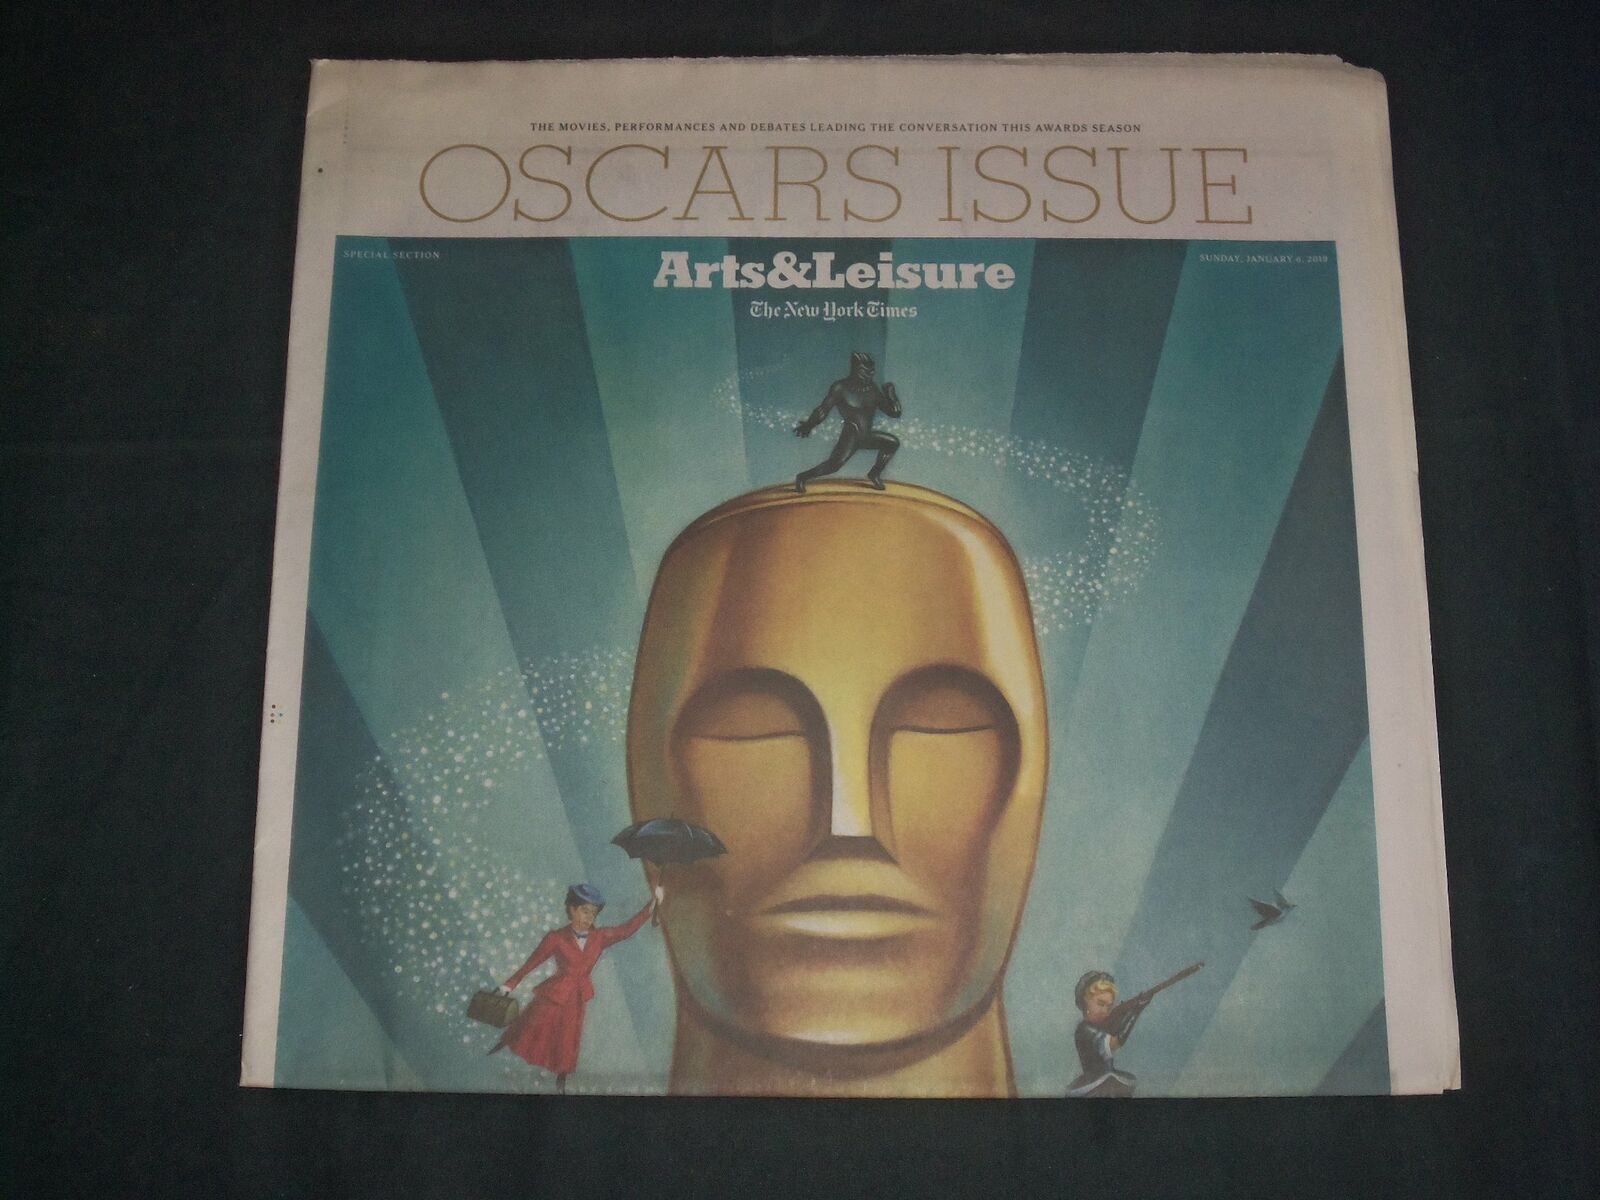 2019 JANUARY 6 NEW YORK TIMES ARTS & LEISURE SECTION - OSCARS ISSUE - NP 4026